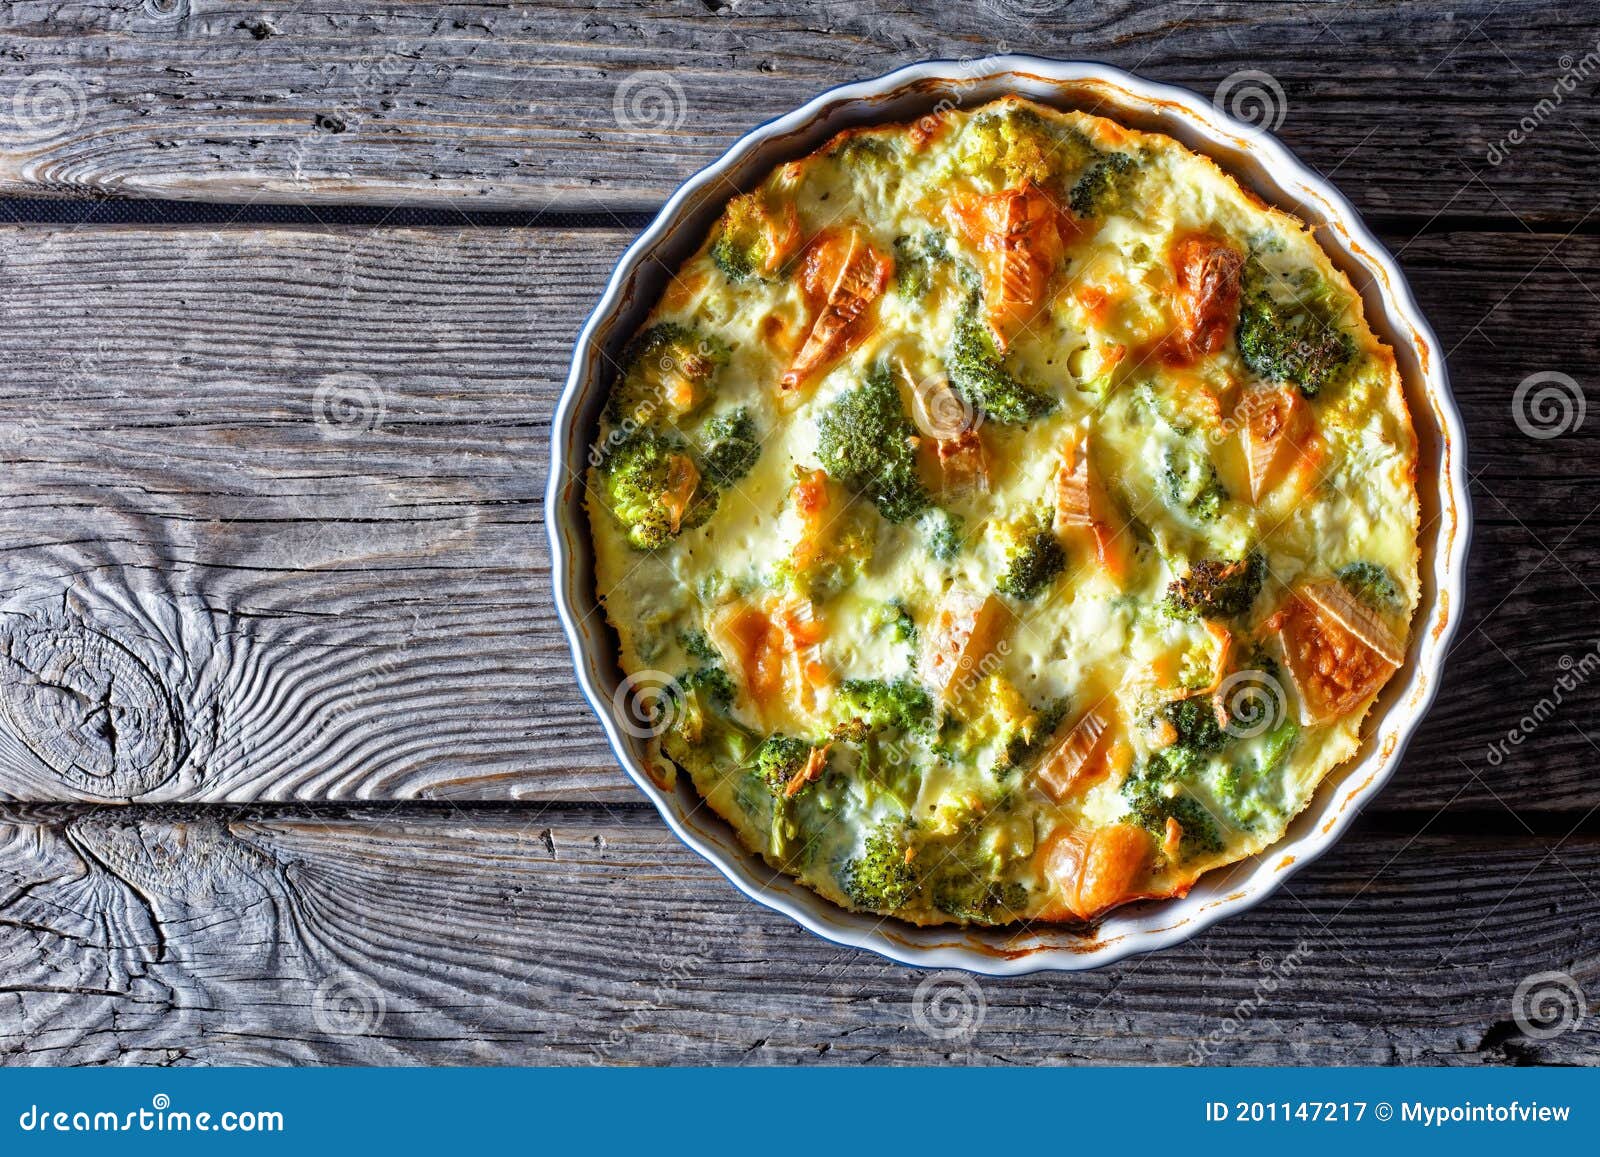 Broccoli Florets Baked with Brie Cheese, Top View Stock Image - Image ...